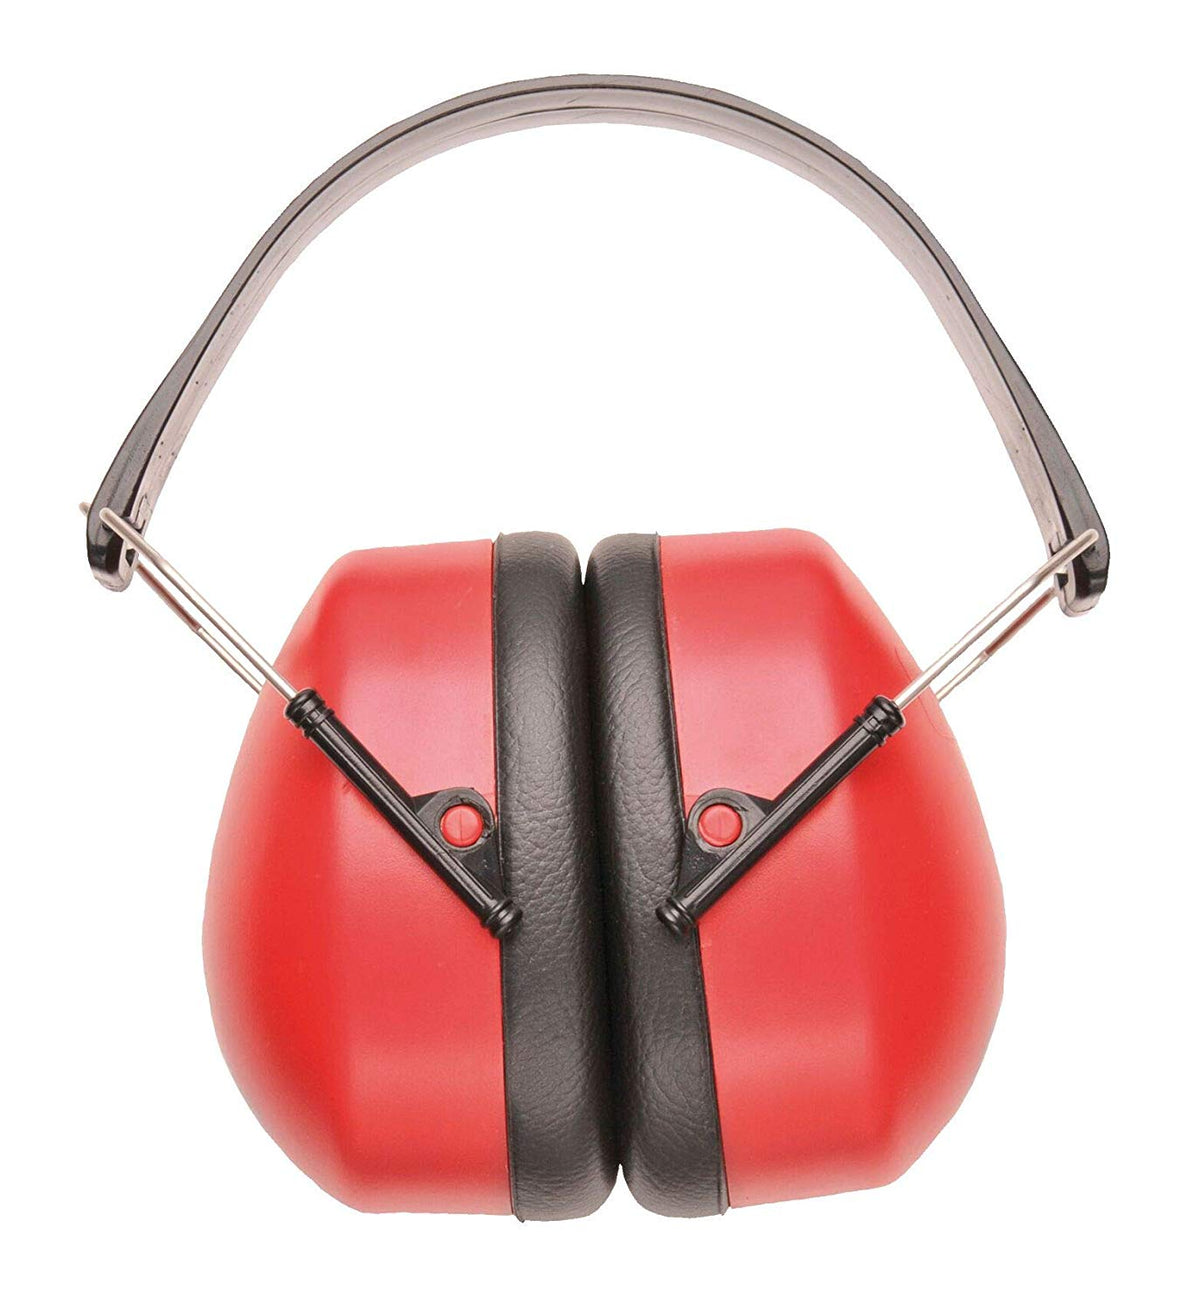 PW41 - Super Ear Protector